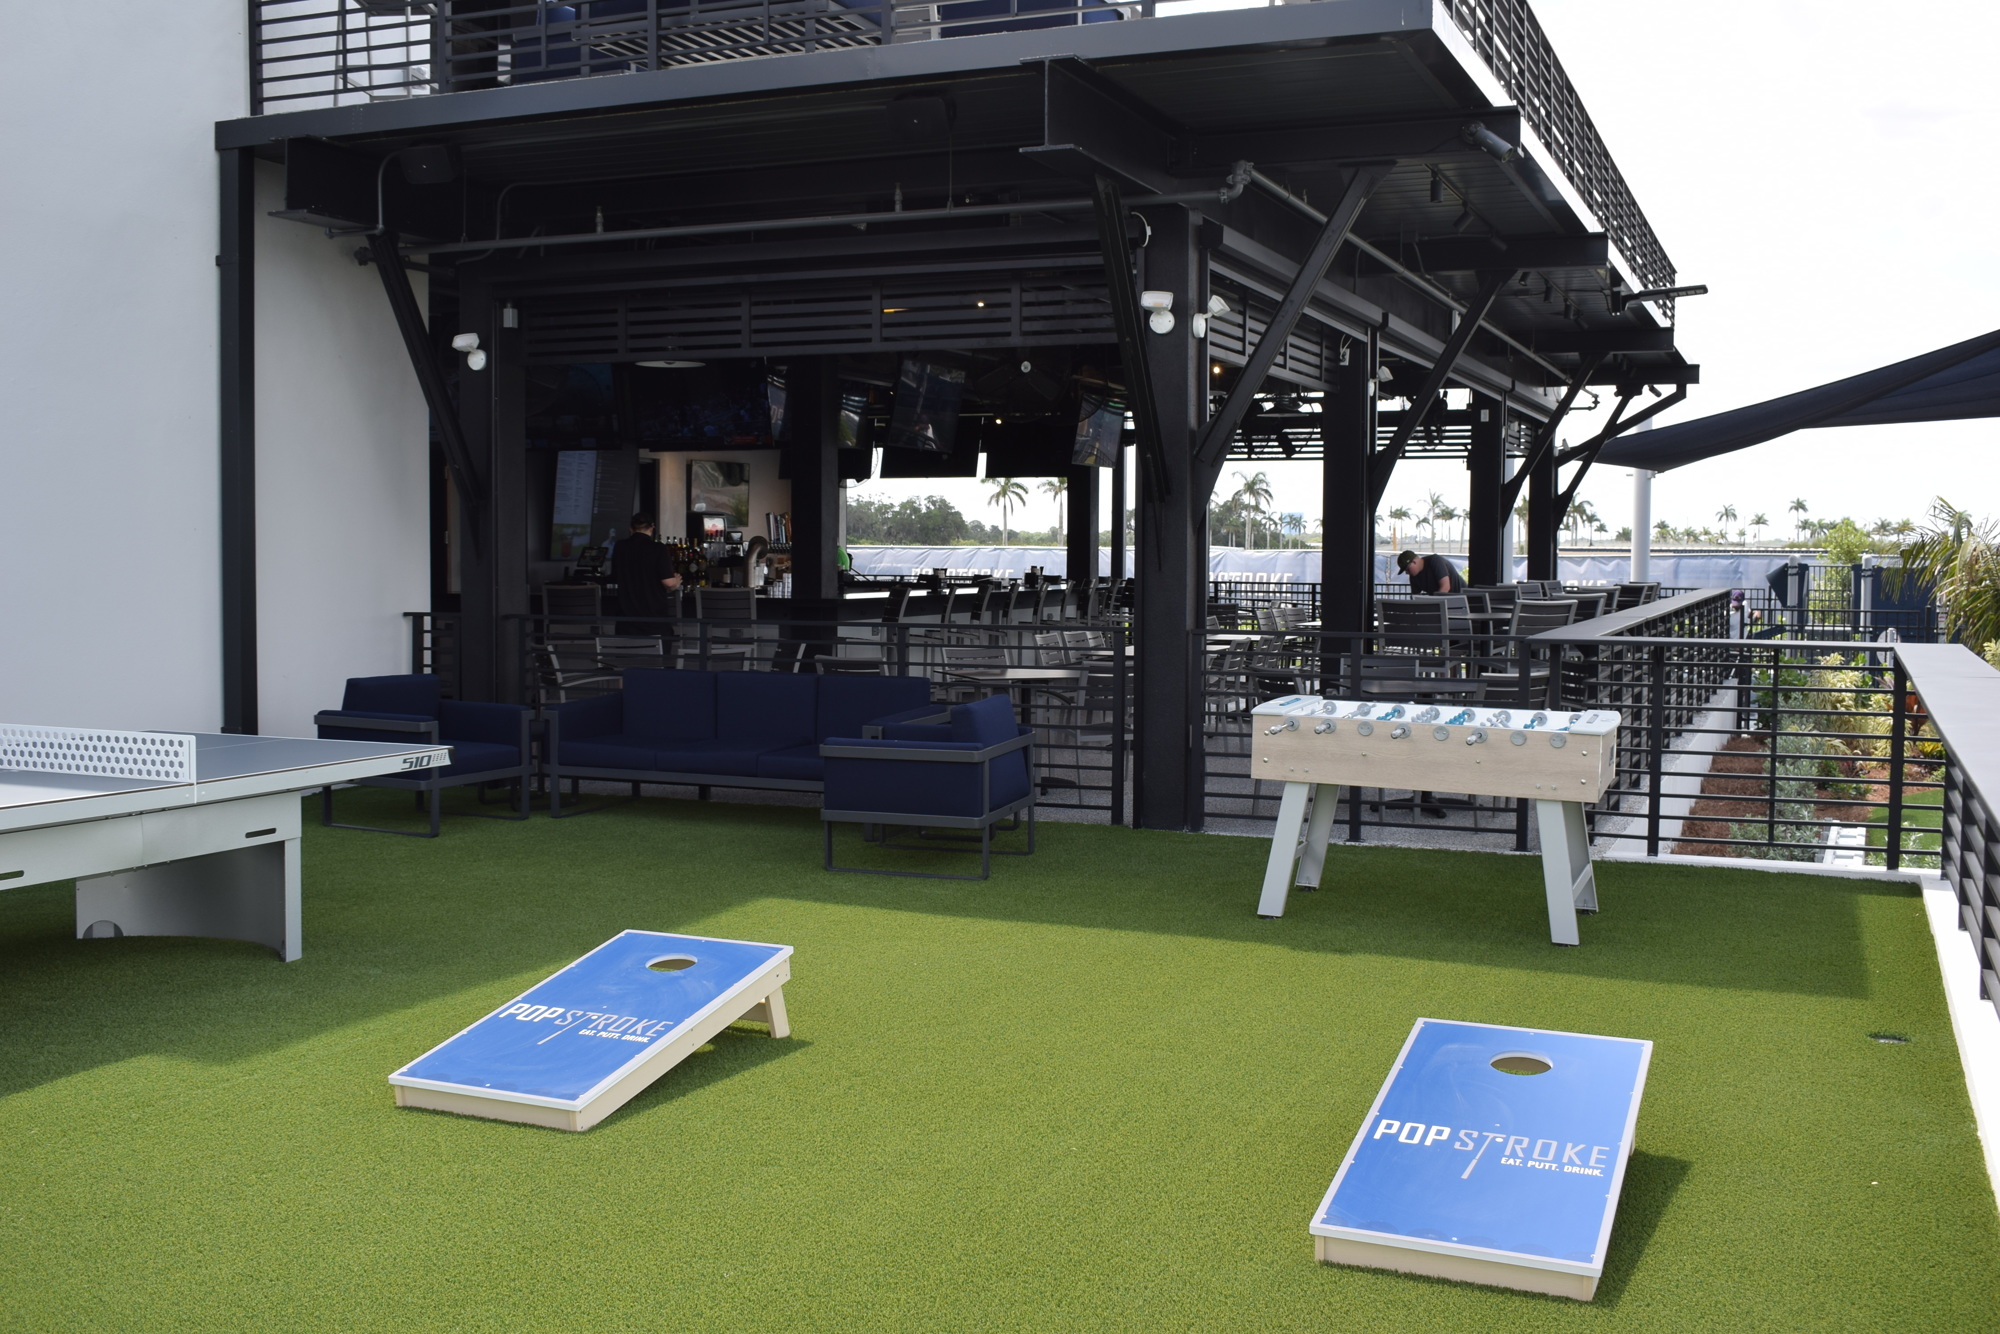 Don't like golf? PopStroke also offers cornhole, foosball and pingpong.